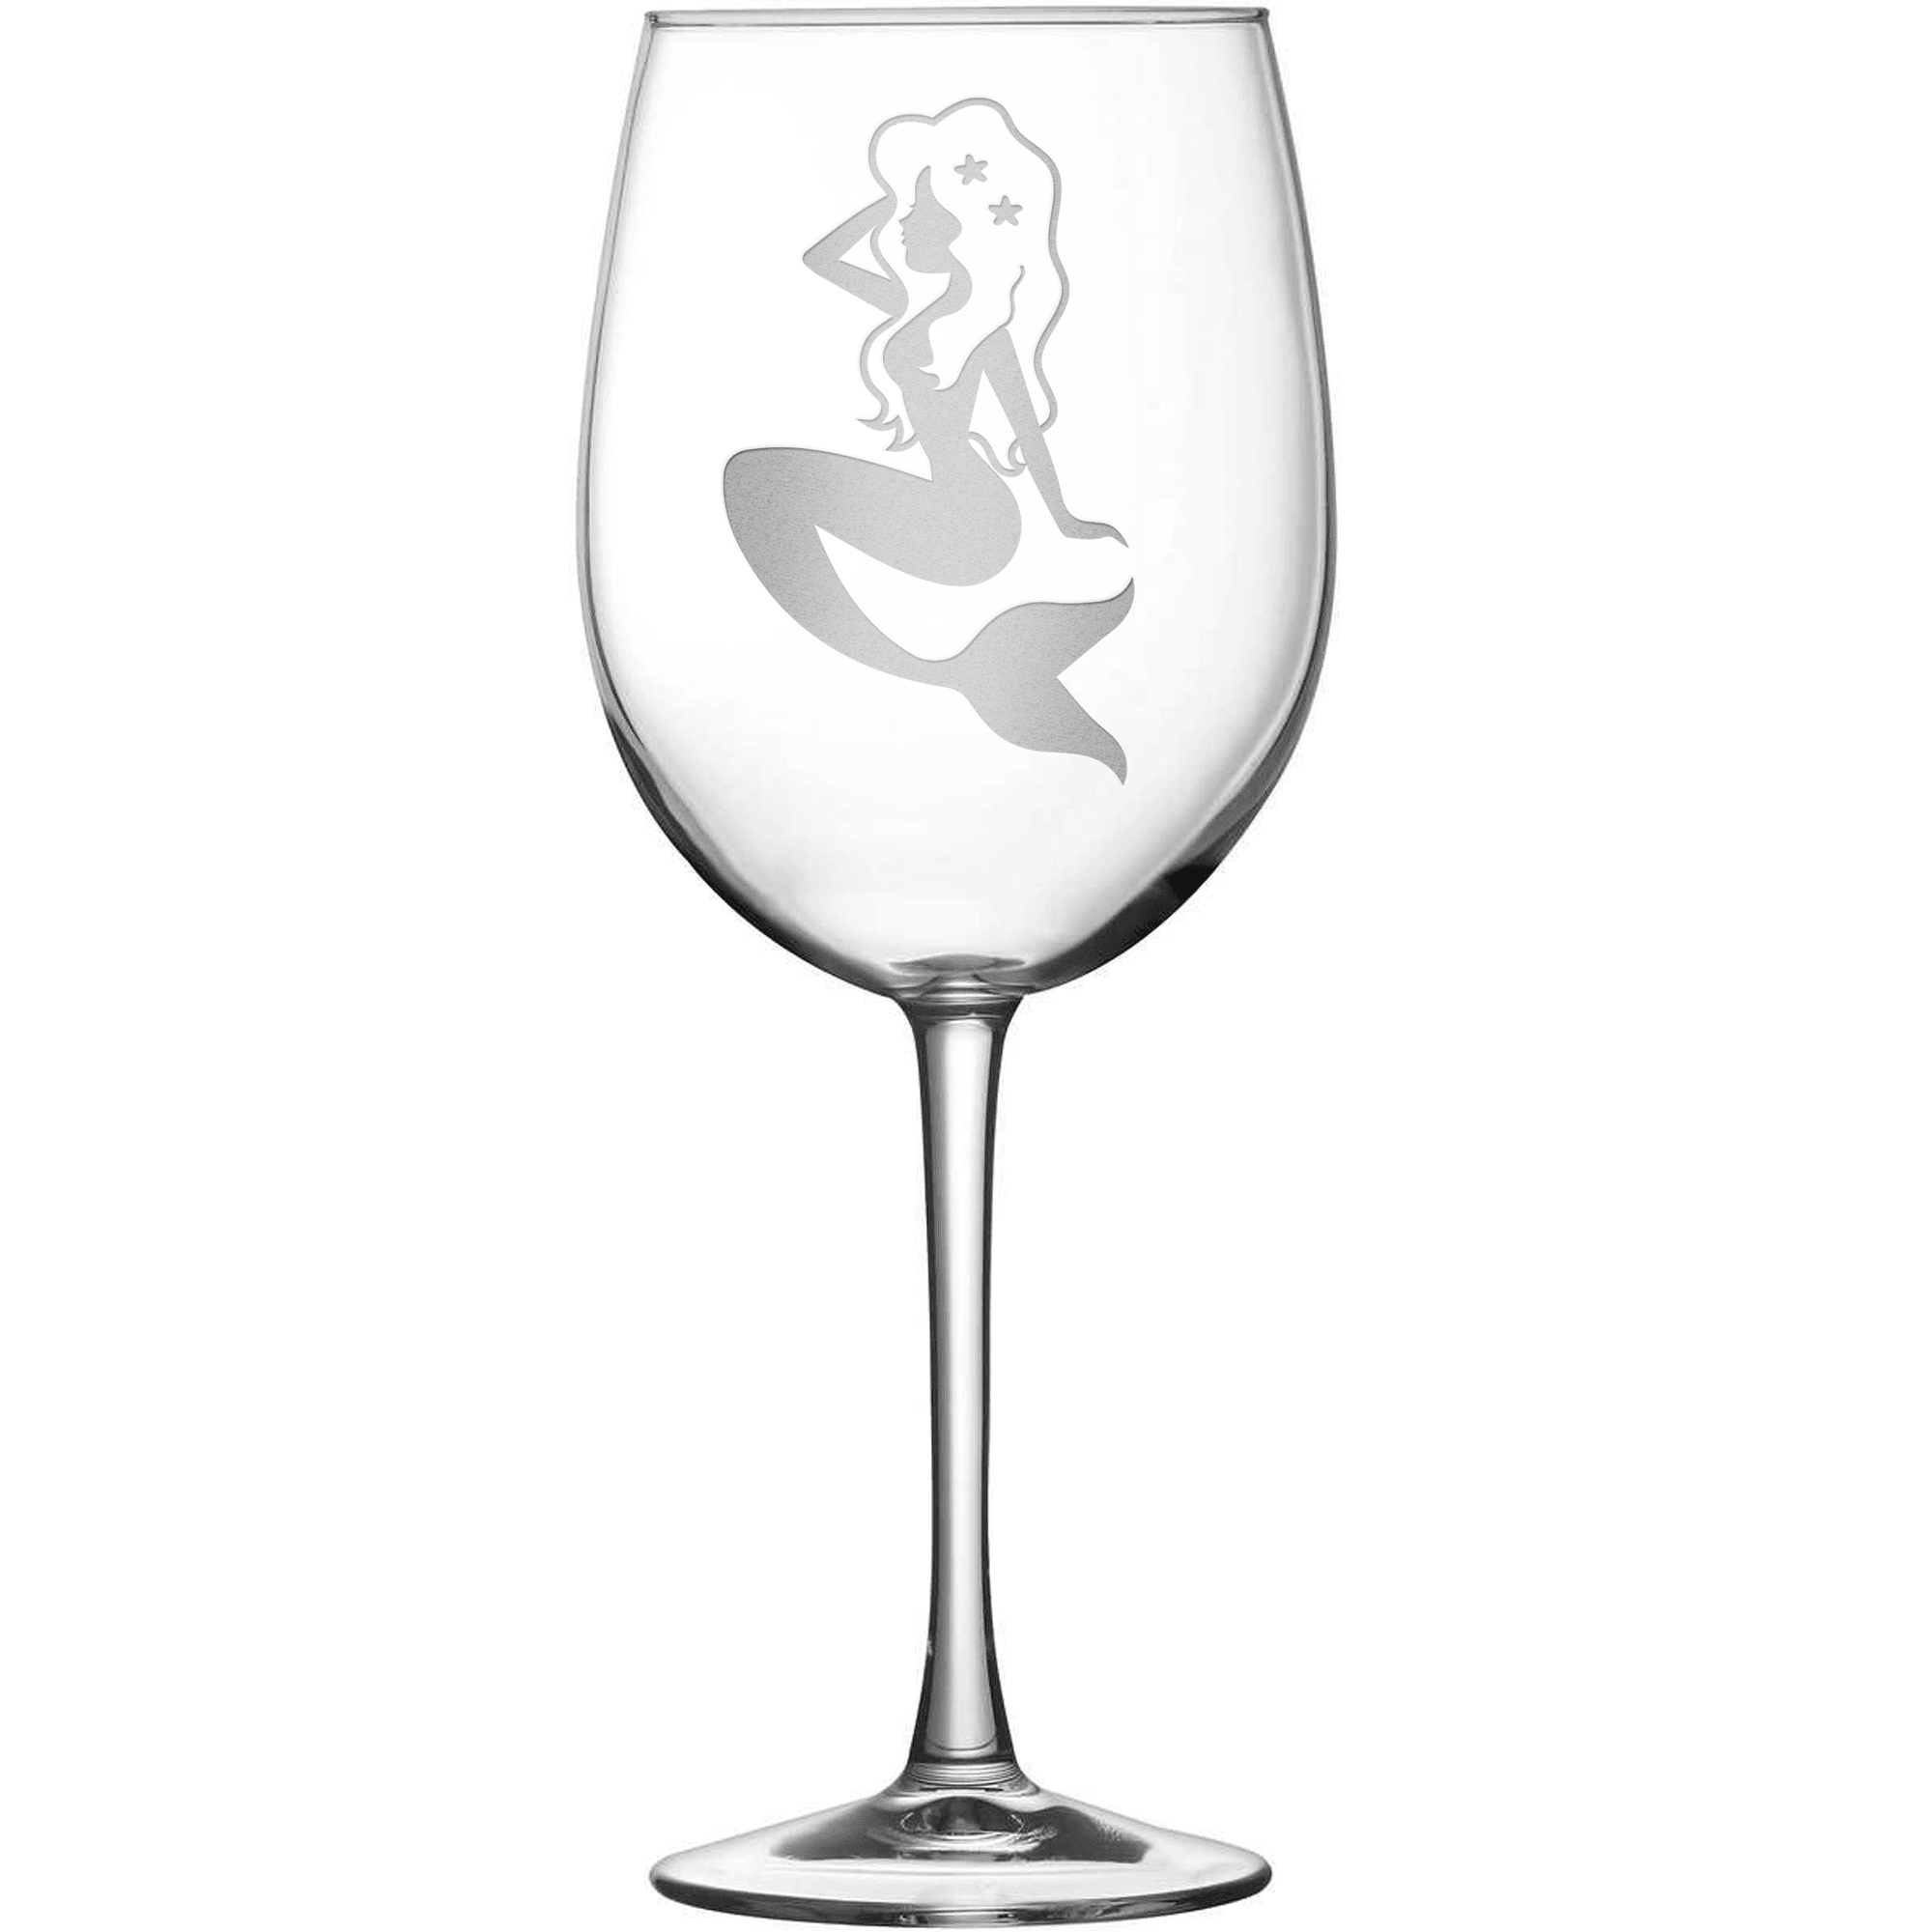 Tulip Wine Glass with Mermaid Design, Hand Etched by Integrity Bottles